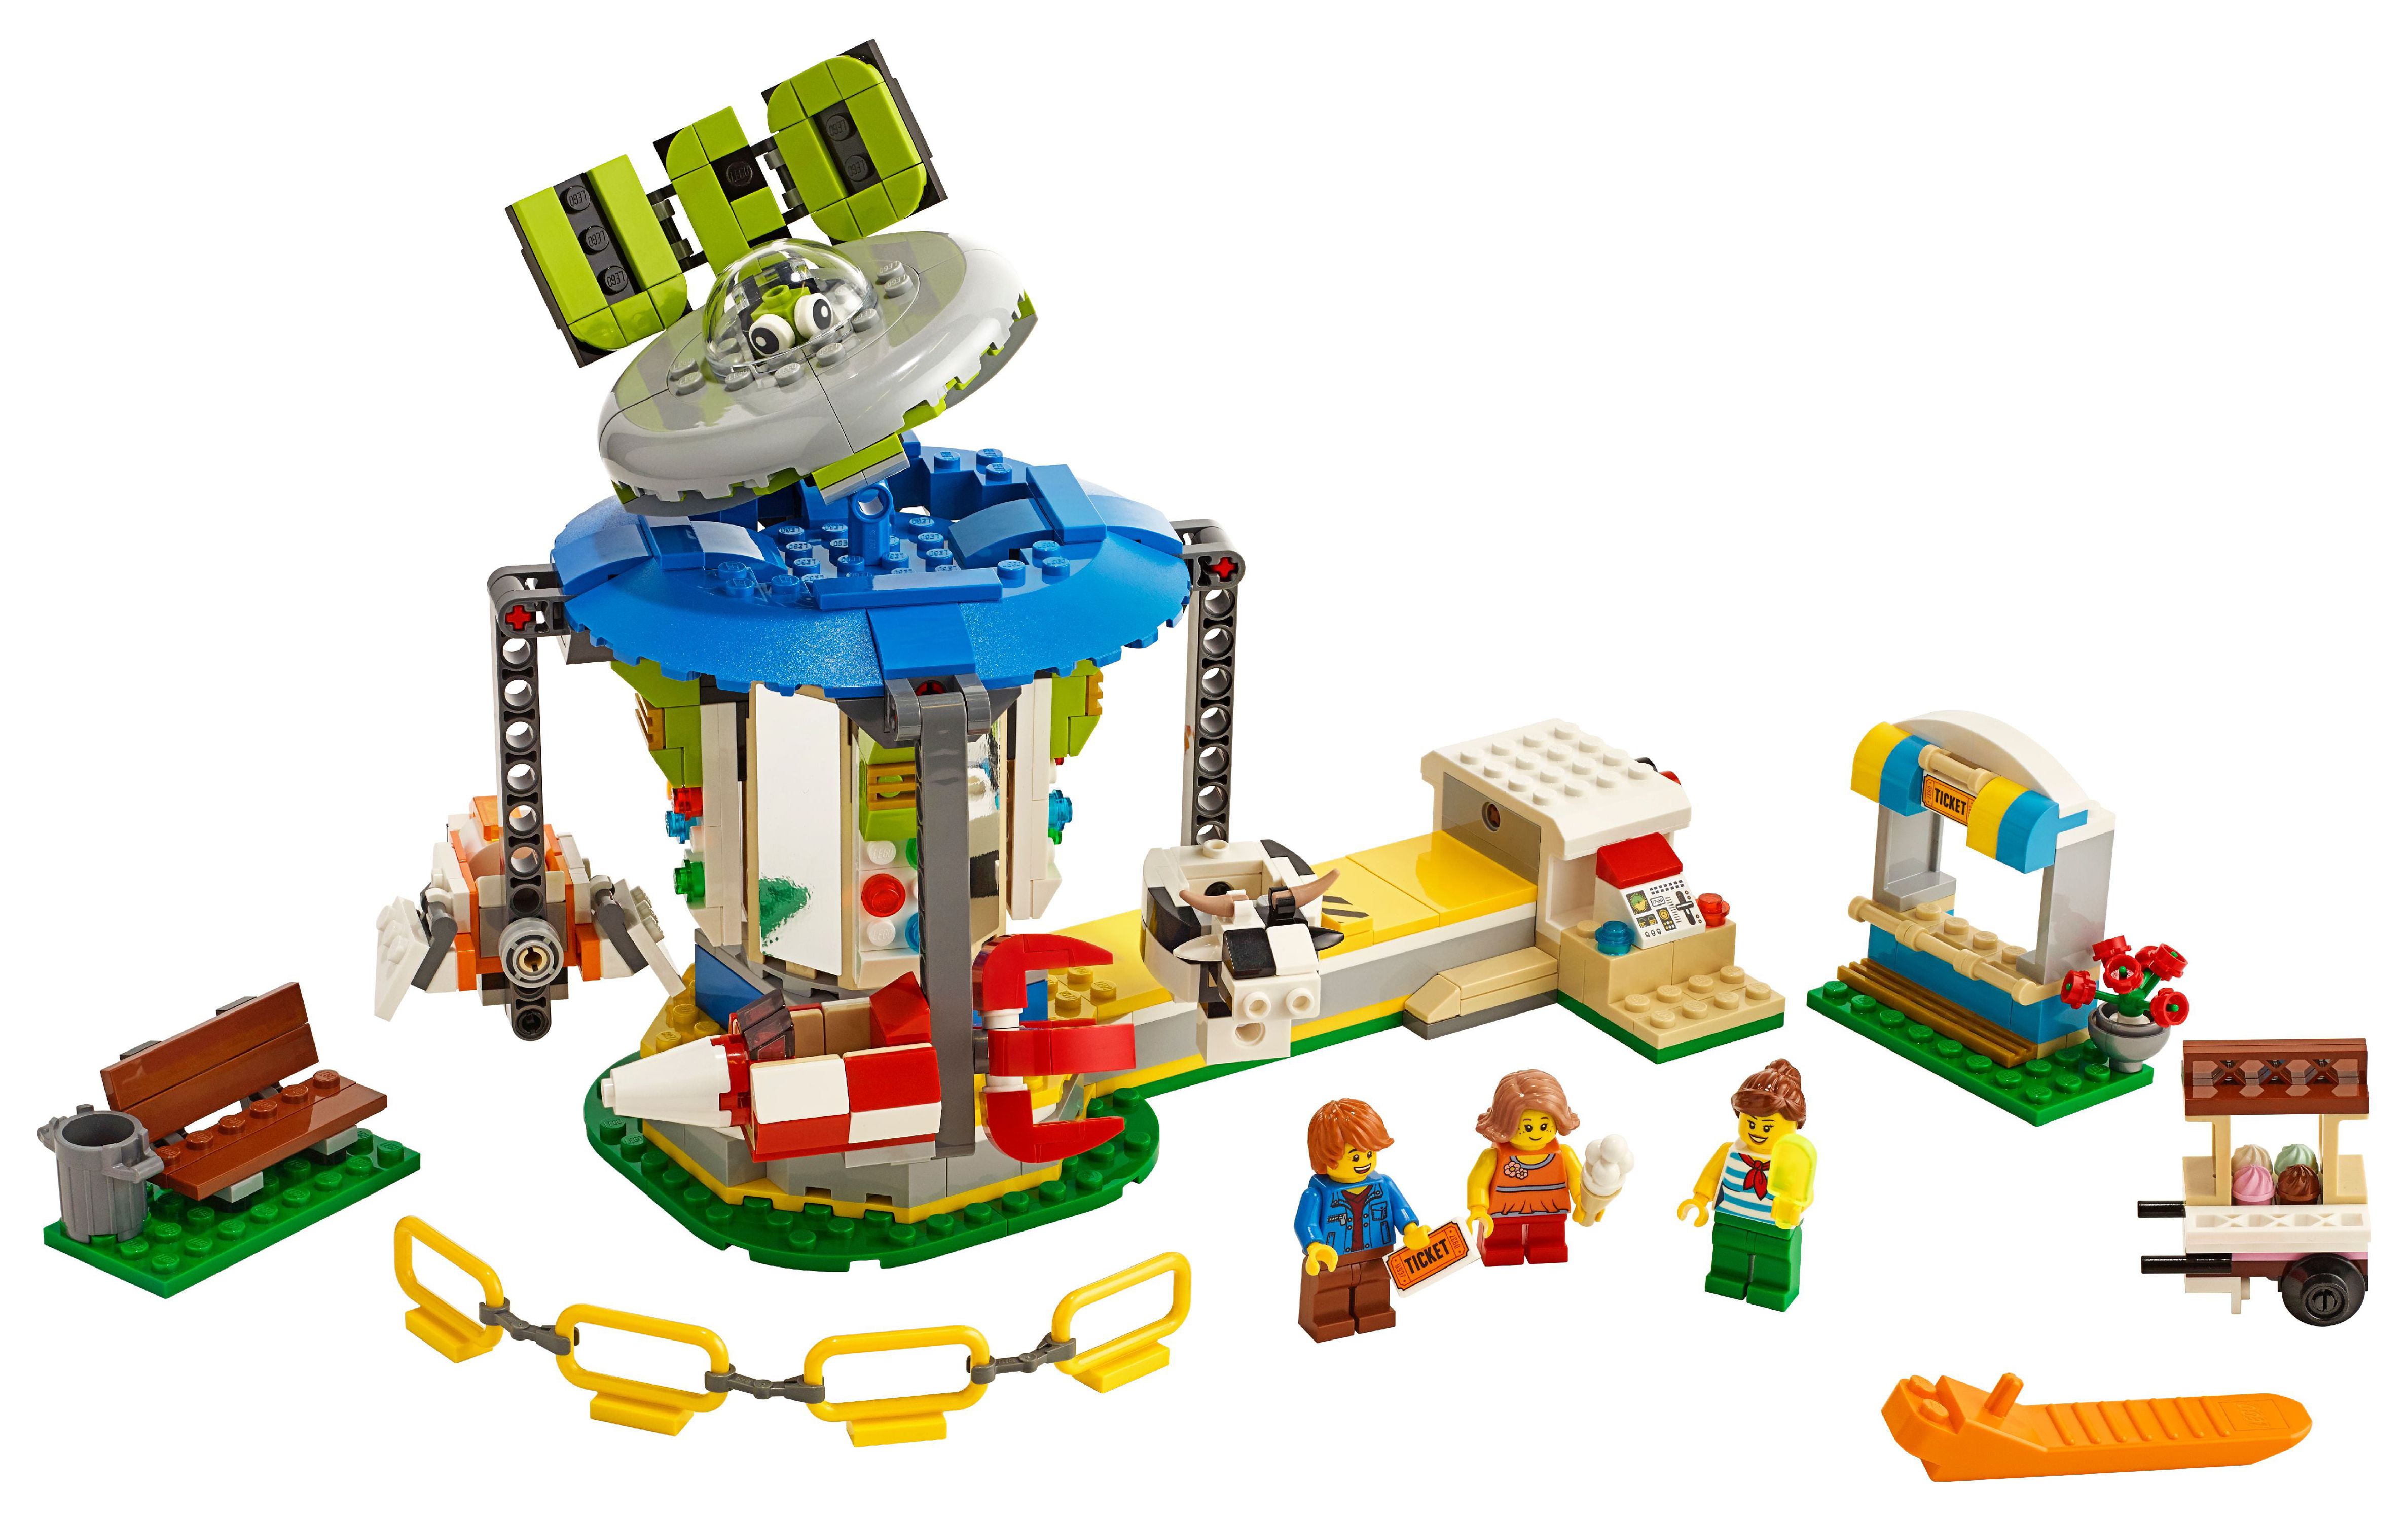 LEGO Creator Fairground Carousel 31095 Space-Themed Building Kit (595 Pieces) - image 8 of 8